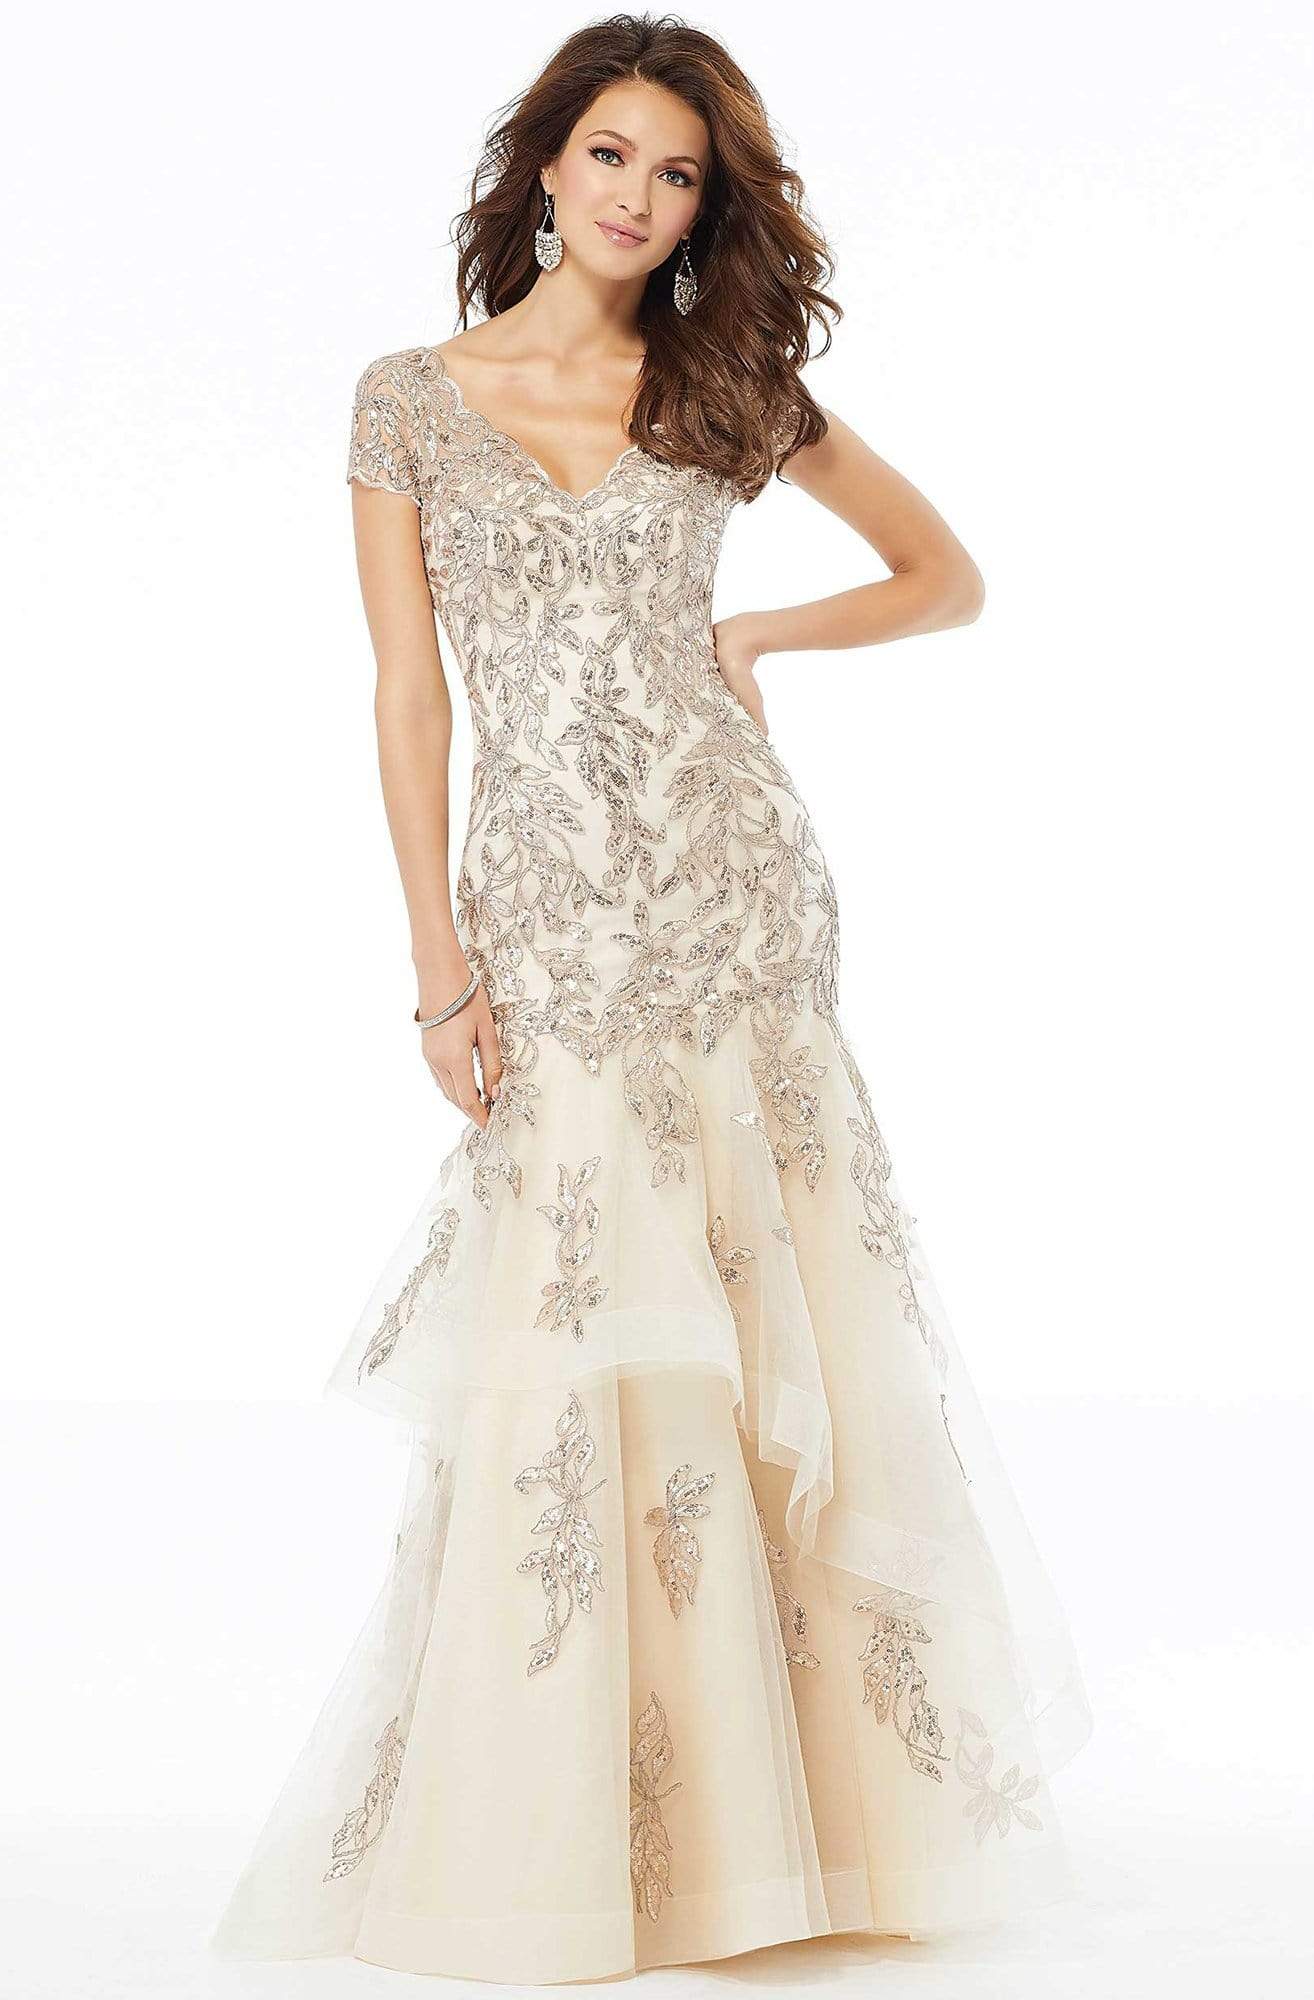 MGNY By Mori Lee - 72107 Sequin Embroidered Trumpet Dress Mother of the Bride Dresses 2 / Champagne